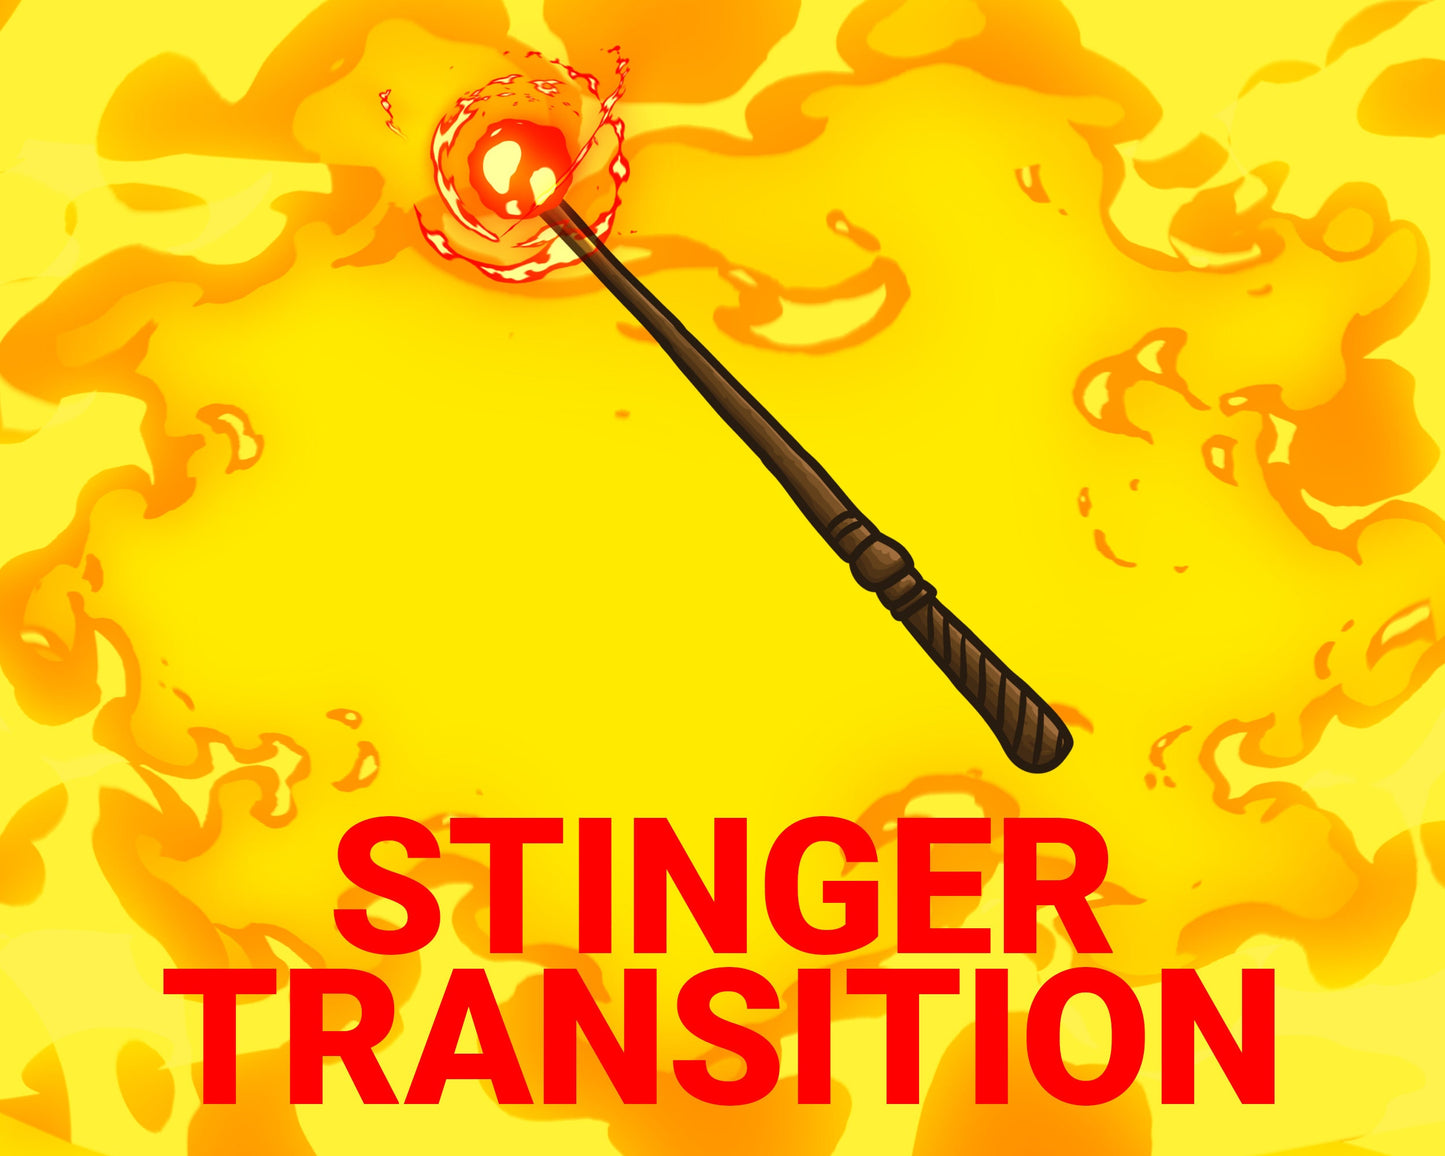 Fire Magic Wand Stinger Transition, Magical Cute Animated Twitch Overlays, Elemental YouTube Facebook and Kick Transitions for Streamers